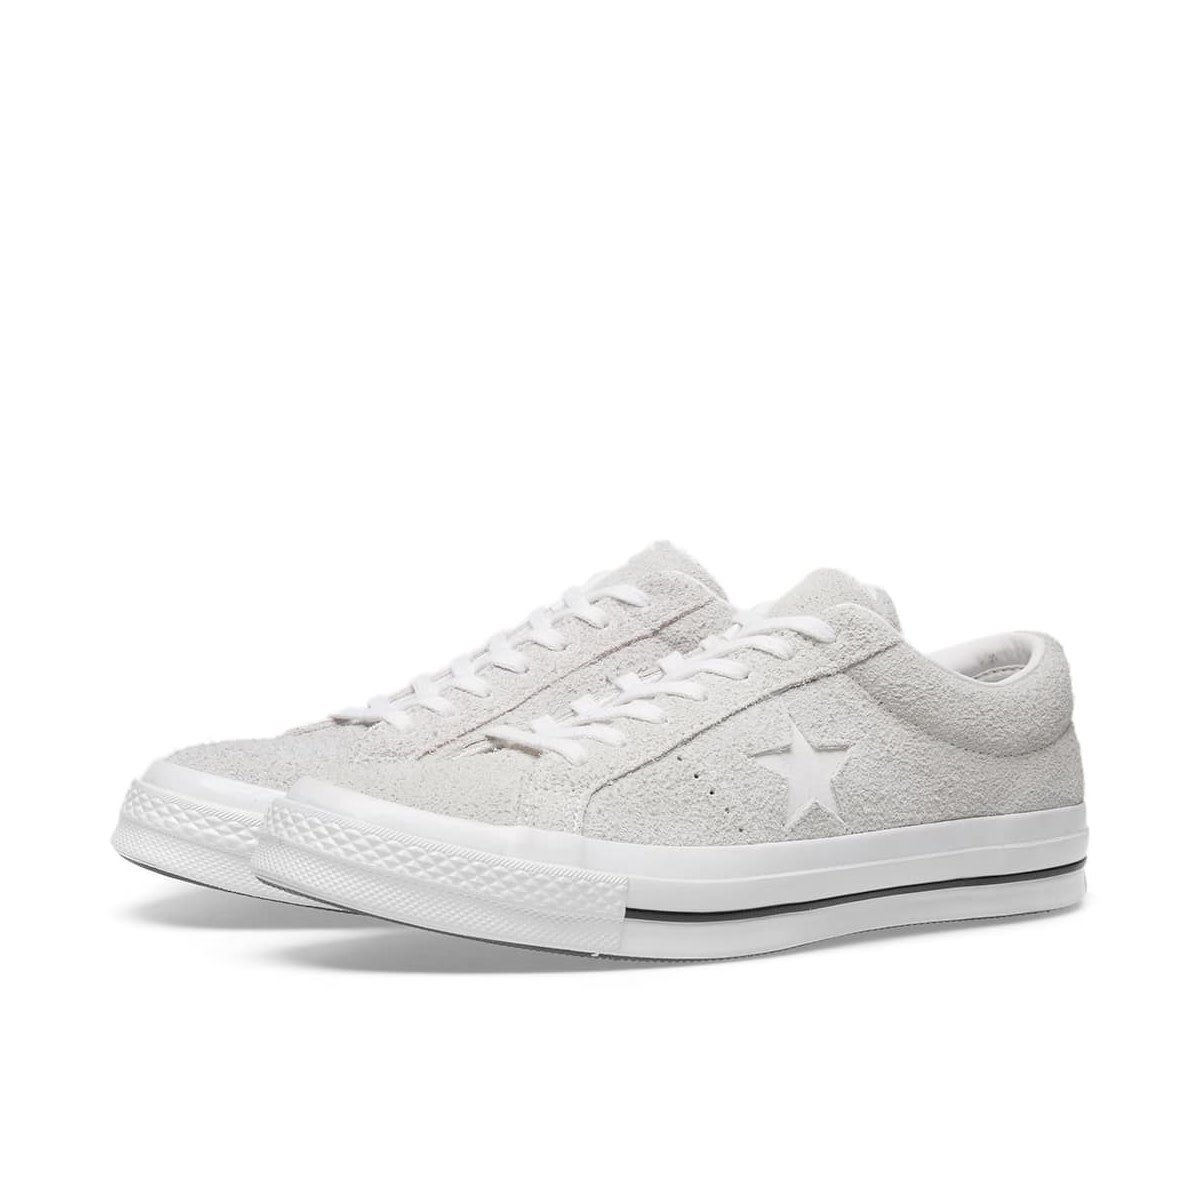 converse one star all white